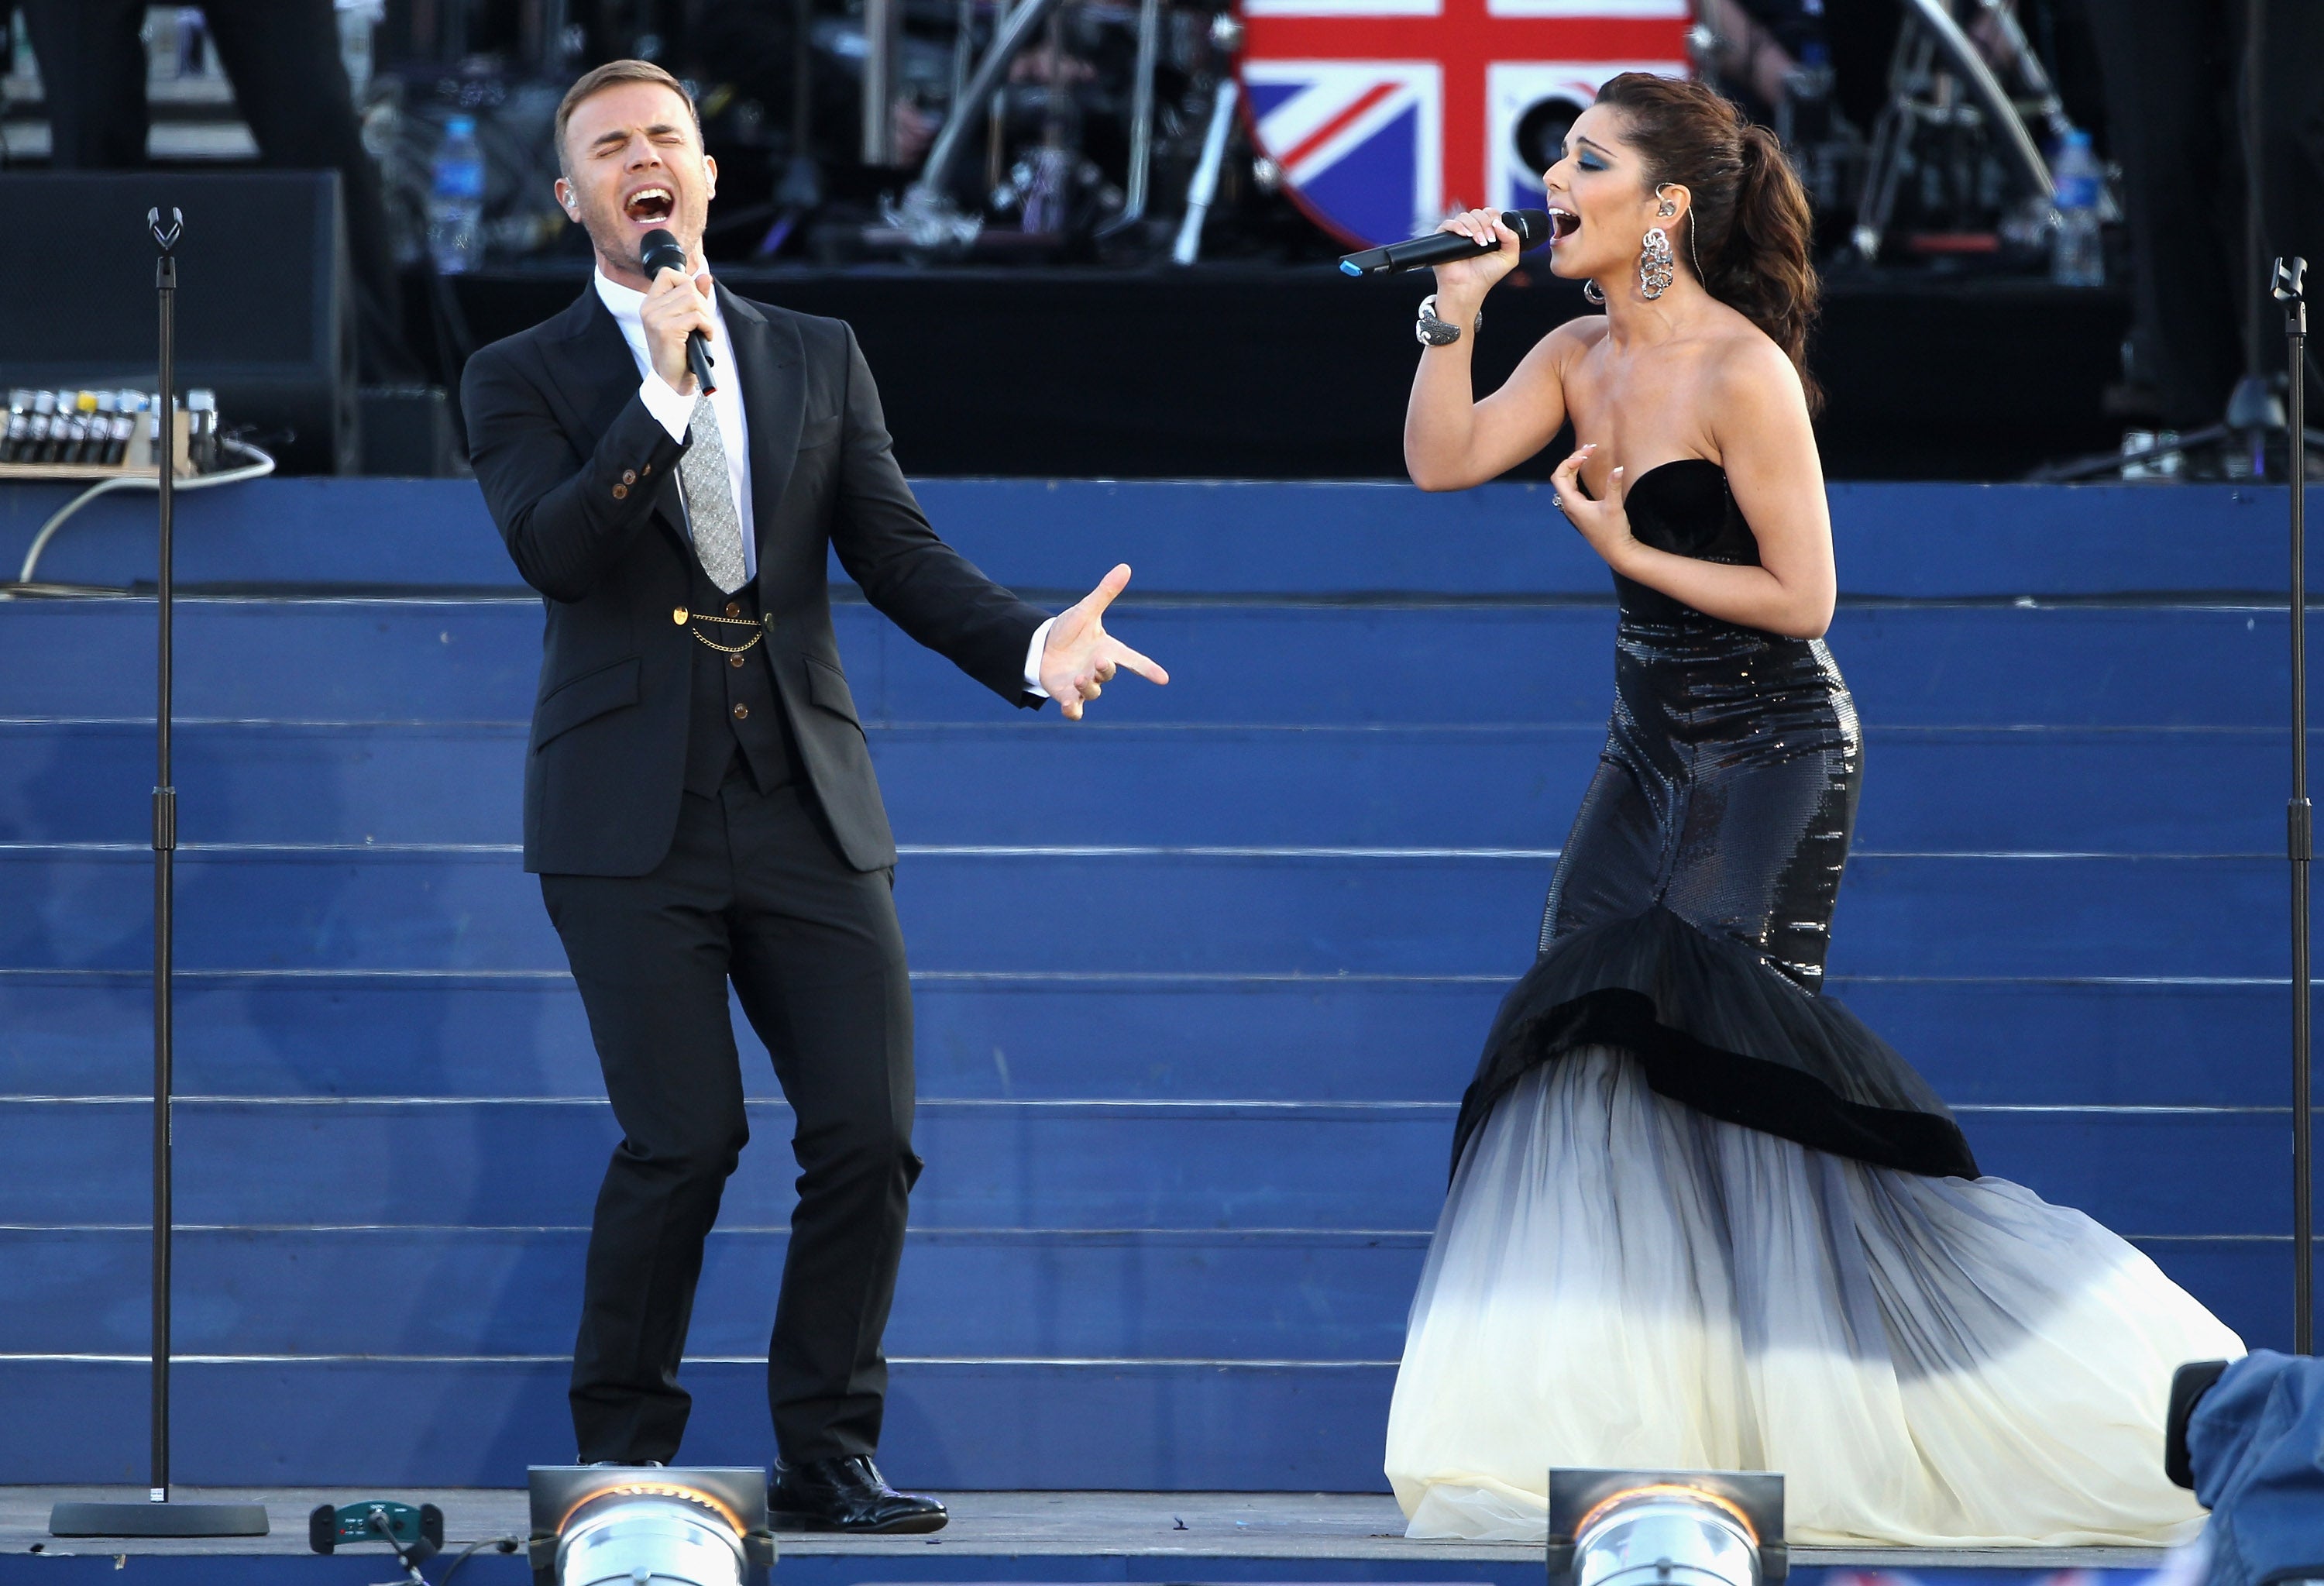 Singers Gary Barlow and Cheryl Cole perform on stage during the Queen’s Diamond Jubilee concert at Buckingham Palace on 4 June 2012